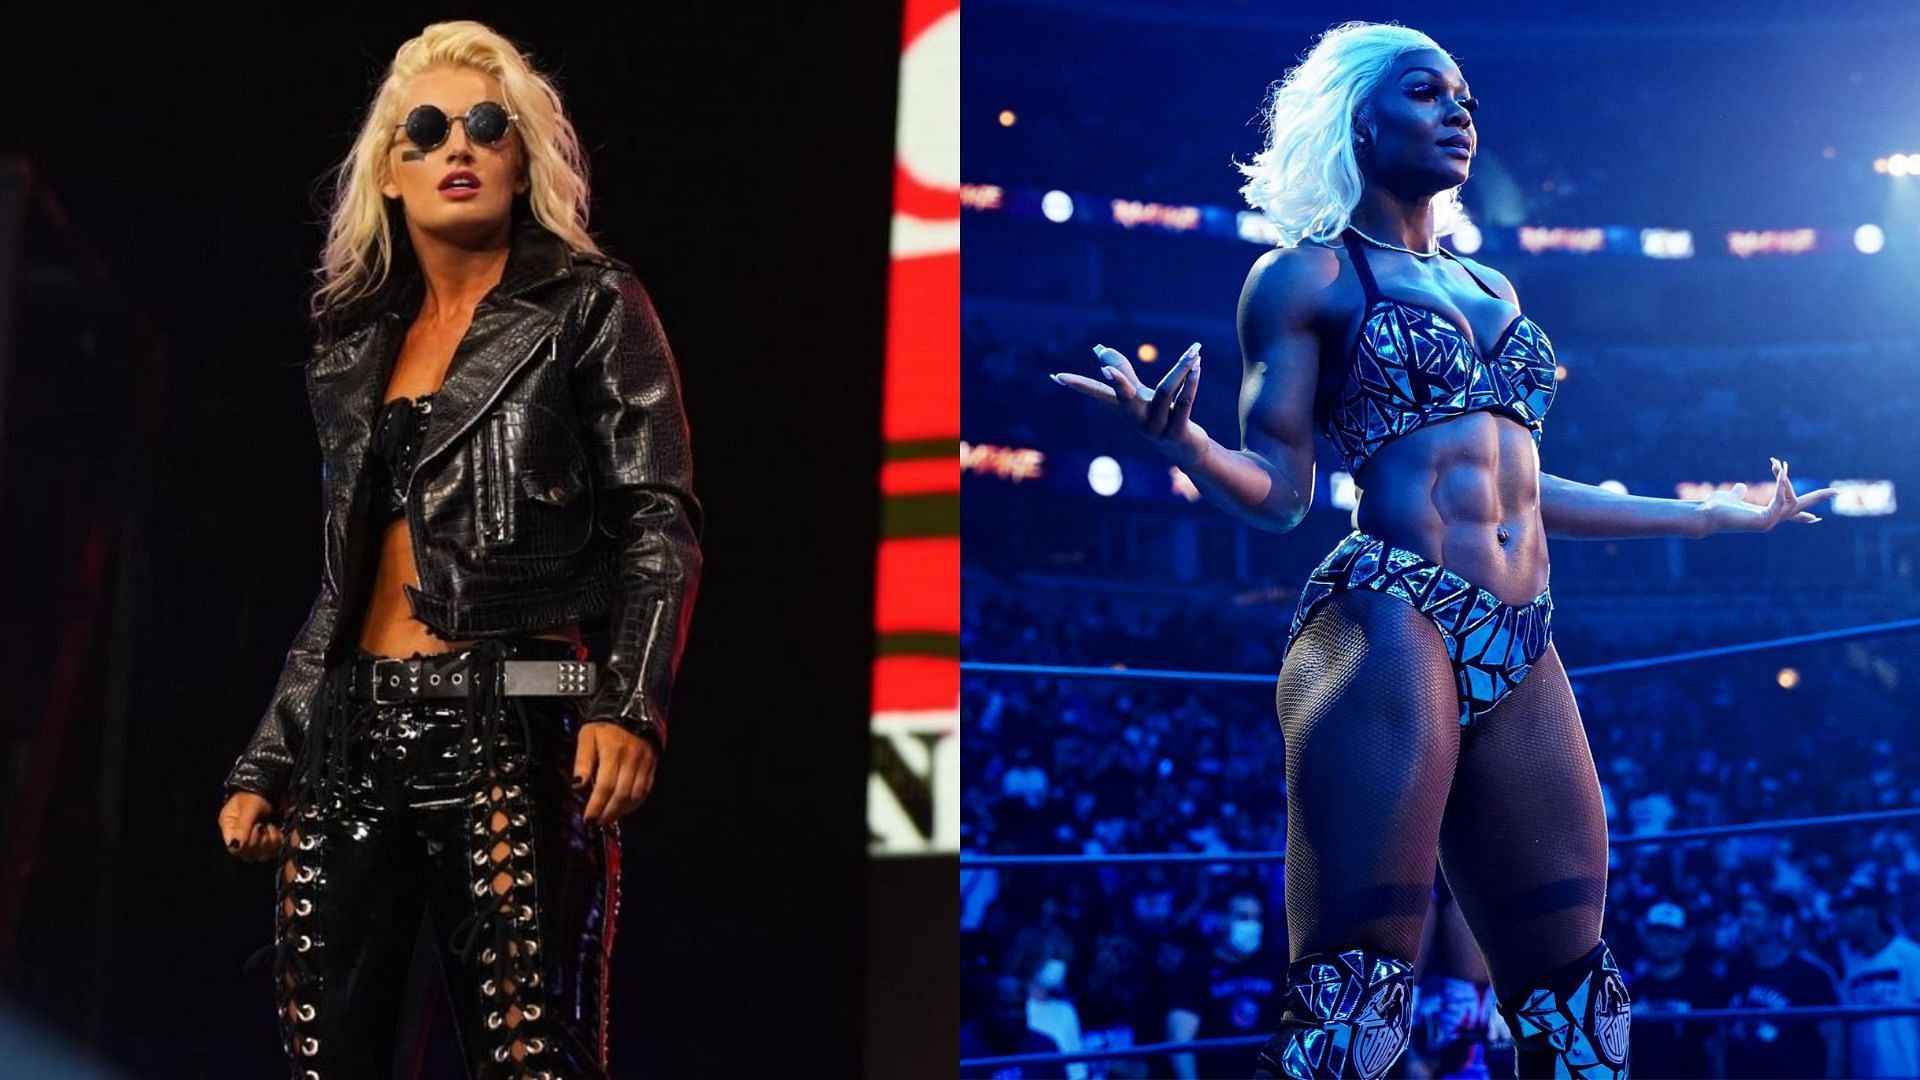 Toni Storm has not faced these opponents in AEW